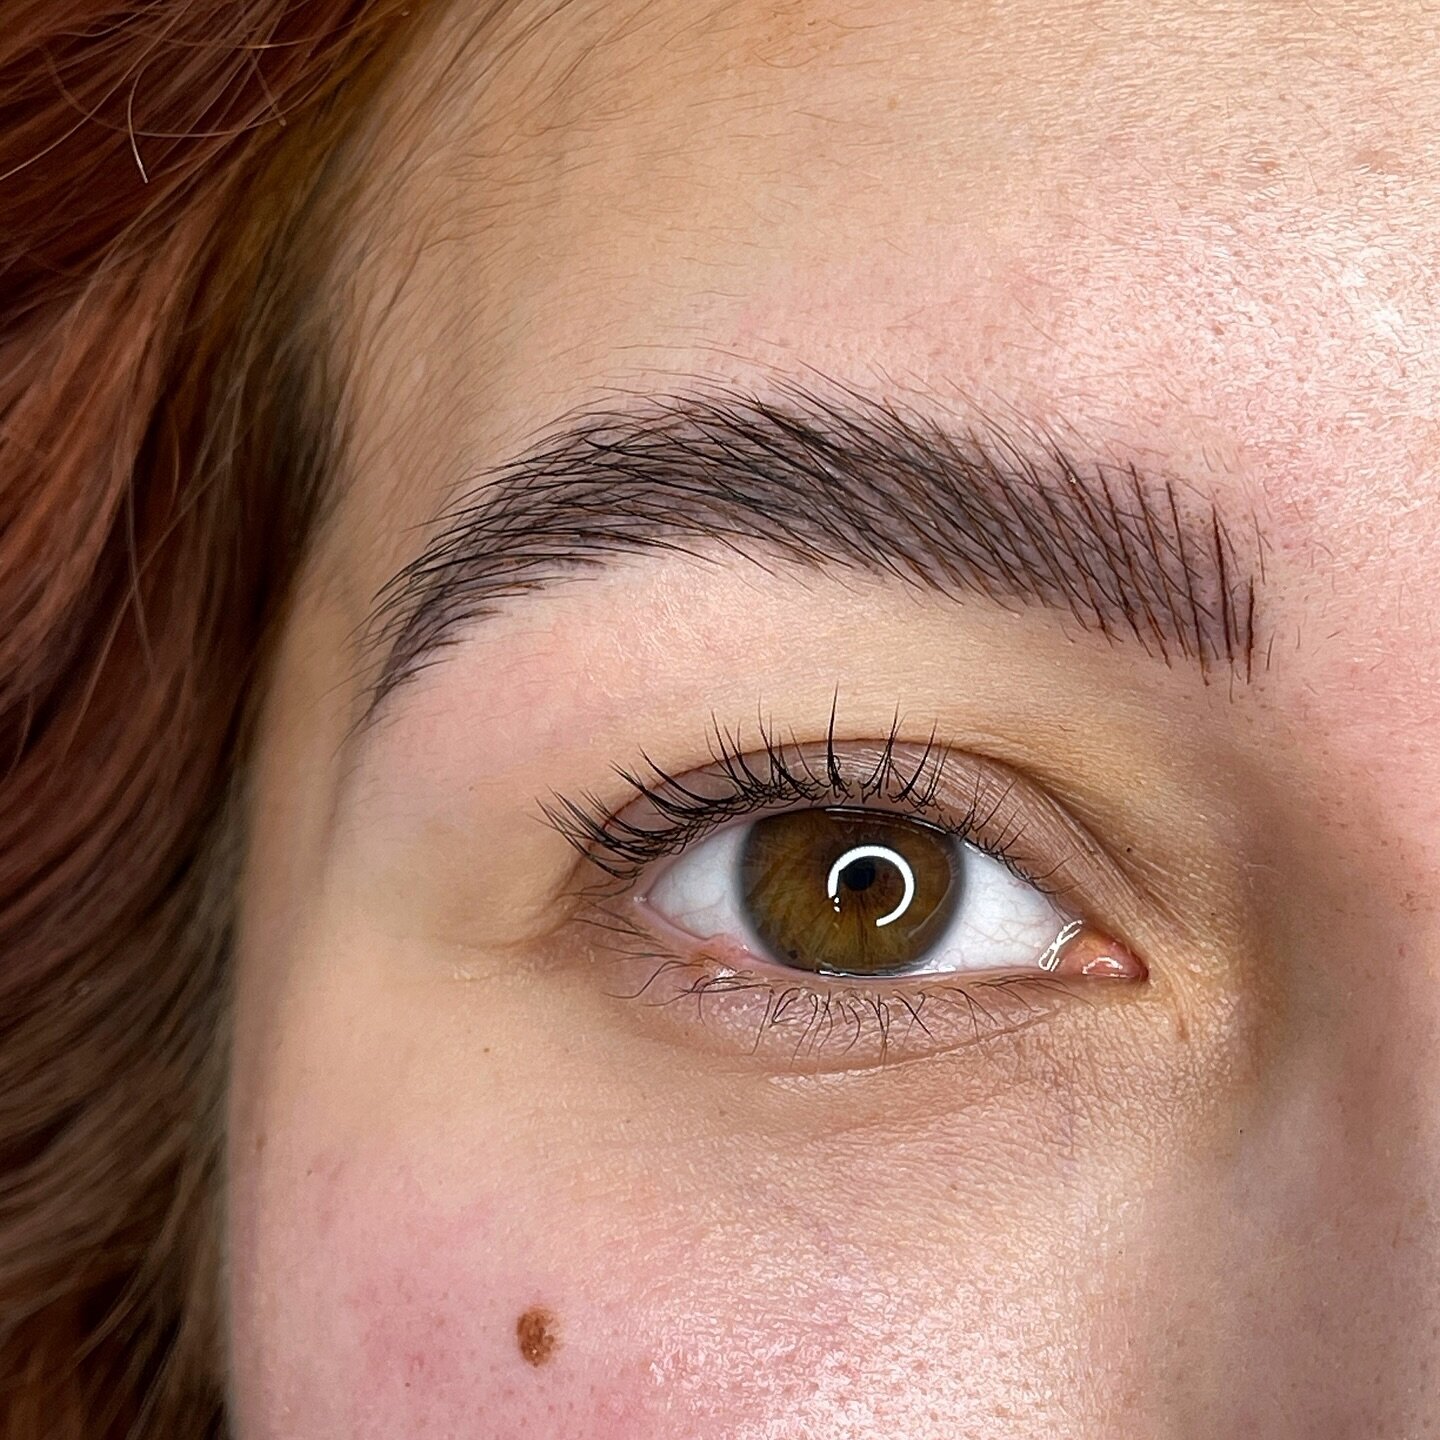 Microblading✨Shape, density and fluff. 
Refreshed brows after 2 years😍

✷Go to link in bio to book your appointment✷

&bull;
&bull;
&bull;
#microblading #brows #cosmetictattoo #cosmetictattoos #cosmetictattooartist #cosmetictattooing #microbladingar